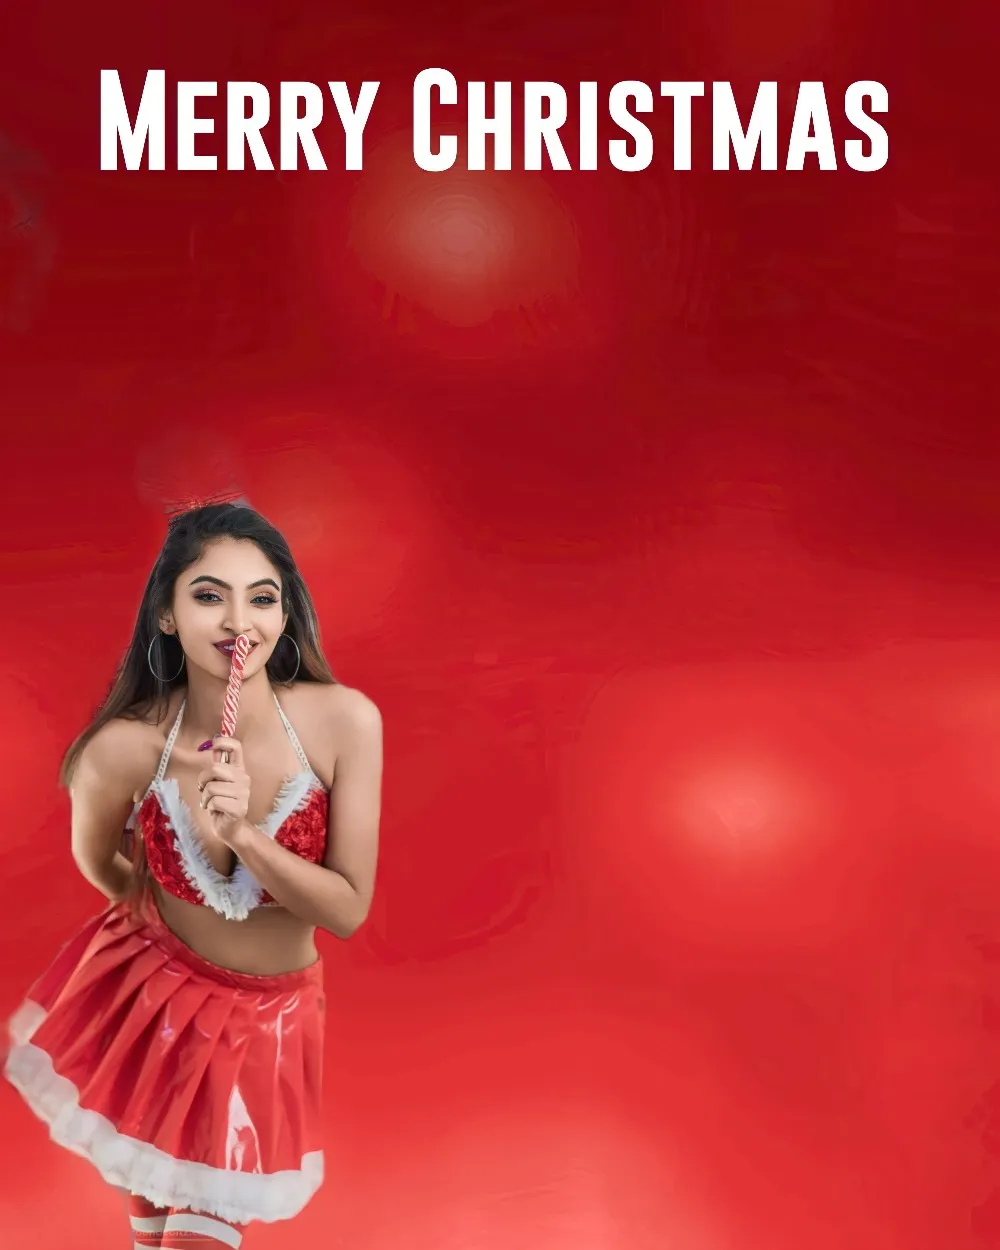 You are currently viewing Hot Santa girl background for photo editing download